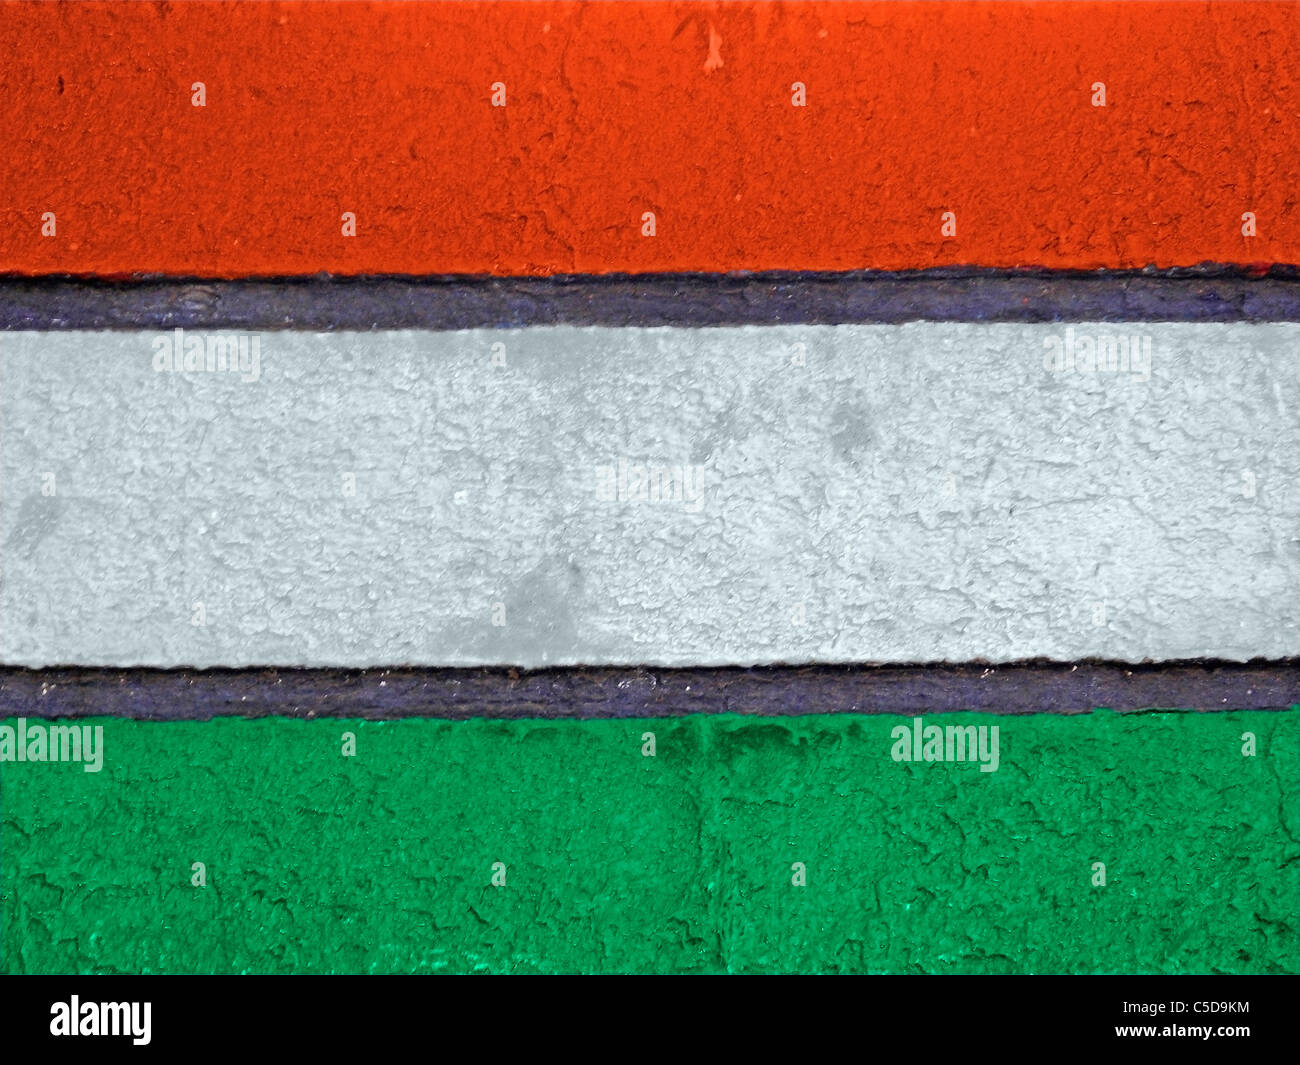 Indian Tricolor Flag Painted on parapet Wall, Concept Stock Photo